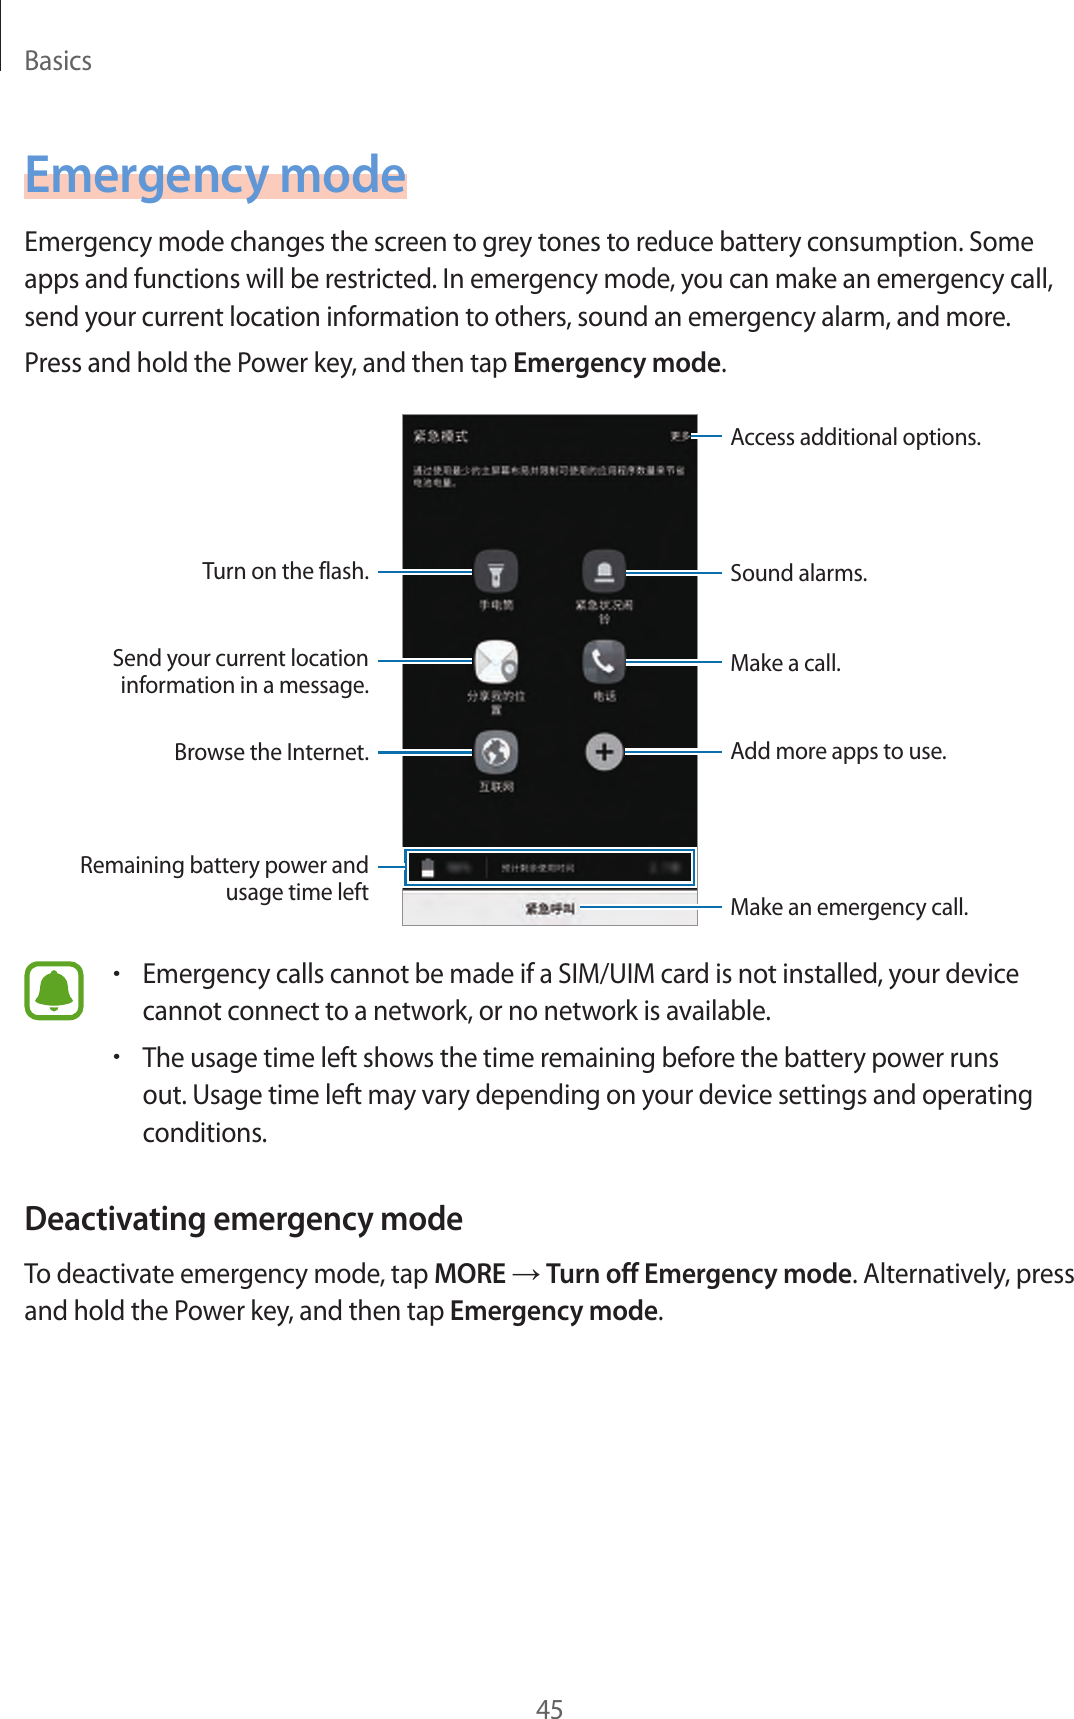 Basics45Emergency modeEmergency mode changes the screen to grey tones to reduce battery consumption. Some apps and functions will be restricted. In emergency mode, you can make an emergency call, send your current location information to others, sound an emergency alarm, and more.Press and hold the Power key, and then tap Emergency mode.Add more apps to use.Make an emergency call.Remaining battery power and usage time leftTurn on the flash.Make a call.Send your current location information in a message.Browse the Internet.Access additional options.Sound alarms.•Emergency calls cannot be made if a SIM/UIM card is not installed, your device cannot connect to a network, or no network is available.•The usage time left shows the time remaining before the battery power runs out. Usage time left may vary depending on your device settings and operating conditions.Deactivating emergency modeTo deactivate emergency mode, tap MORE → Turn off Emergency mode. Alternatively, press and hold the Power key, and then tap Emergency mode.